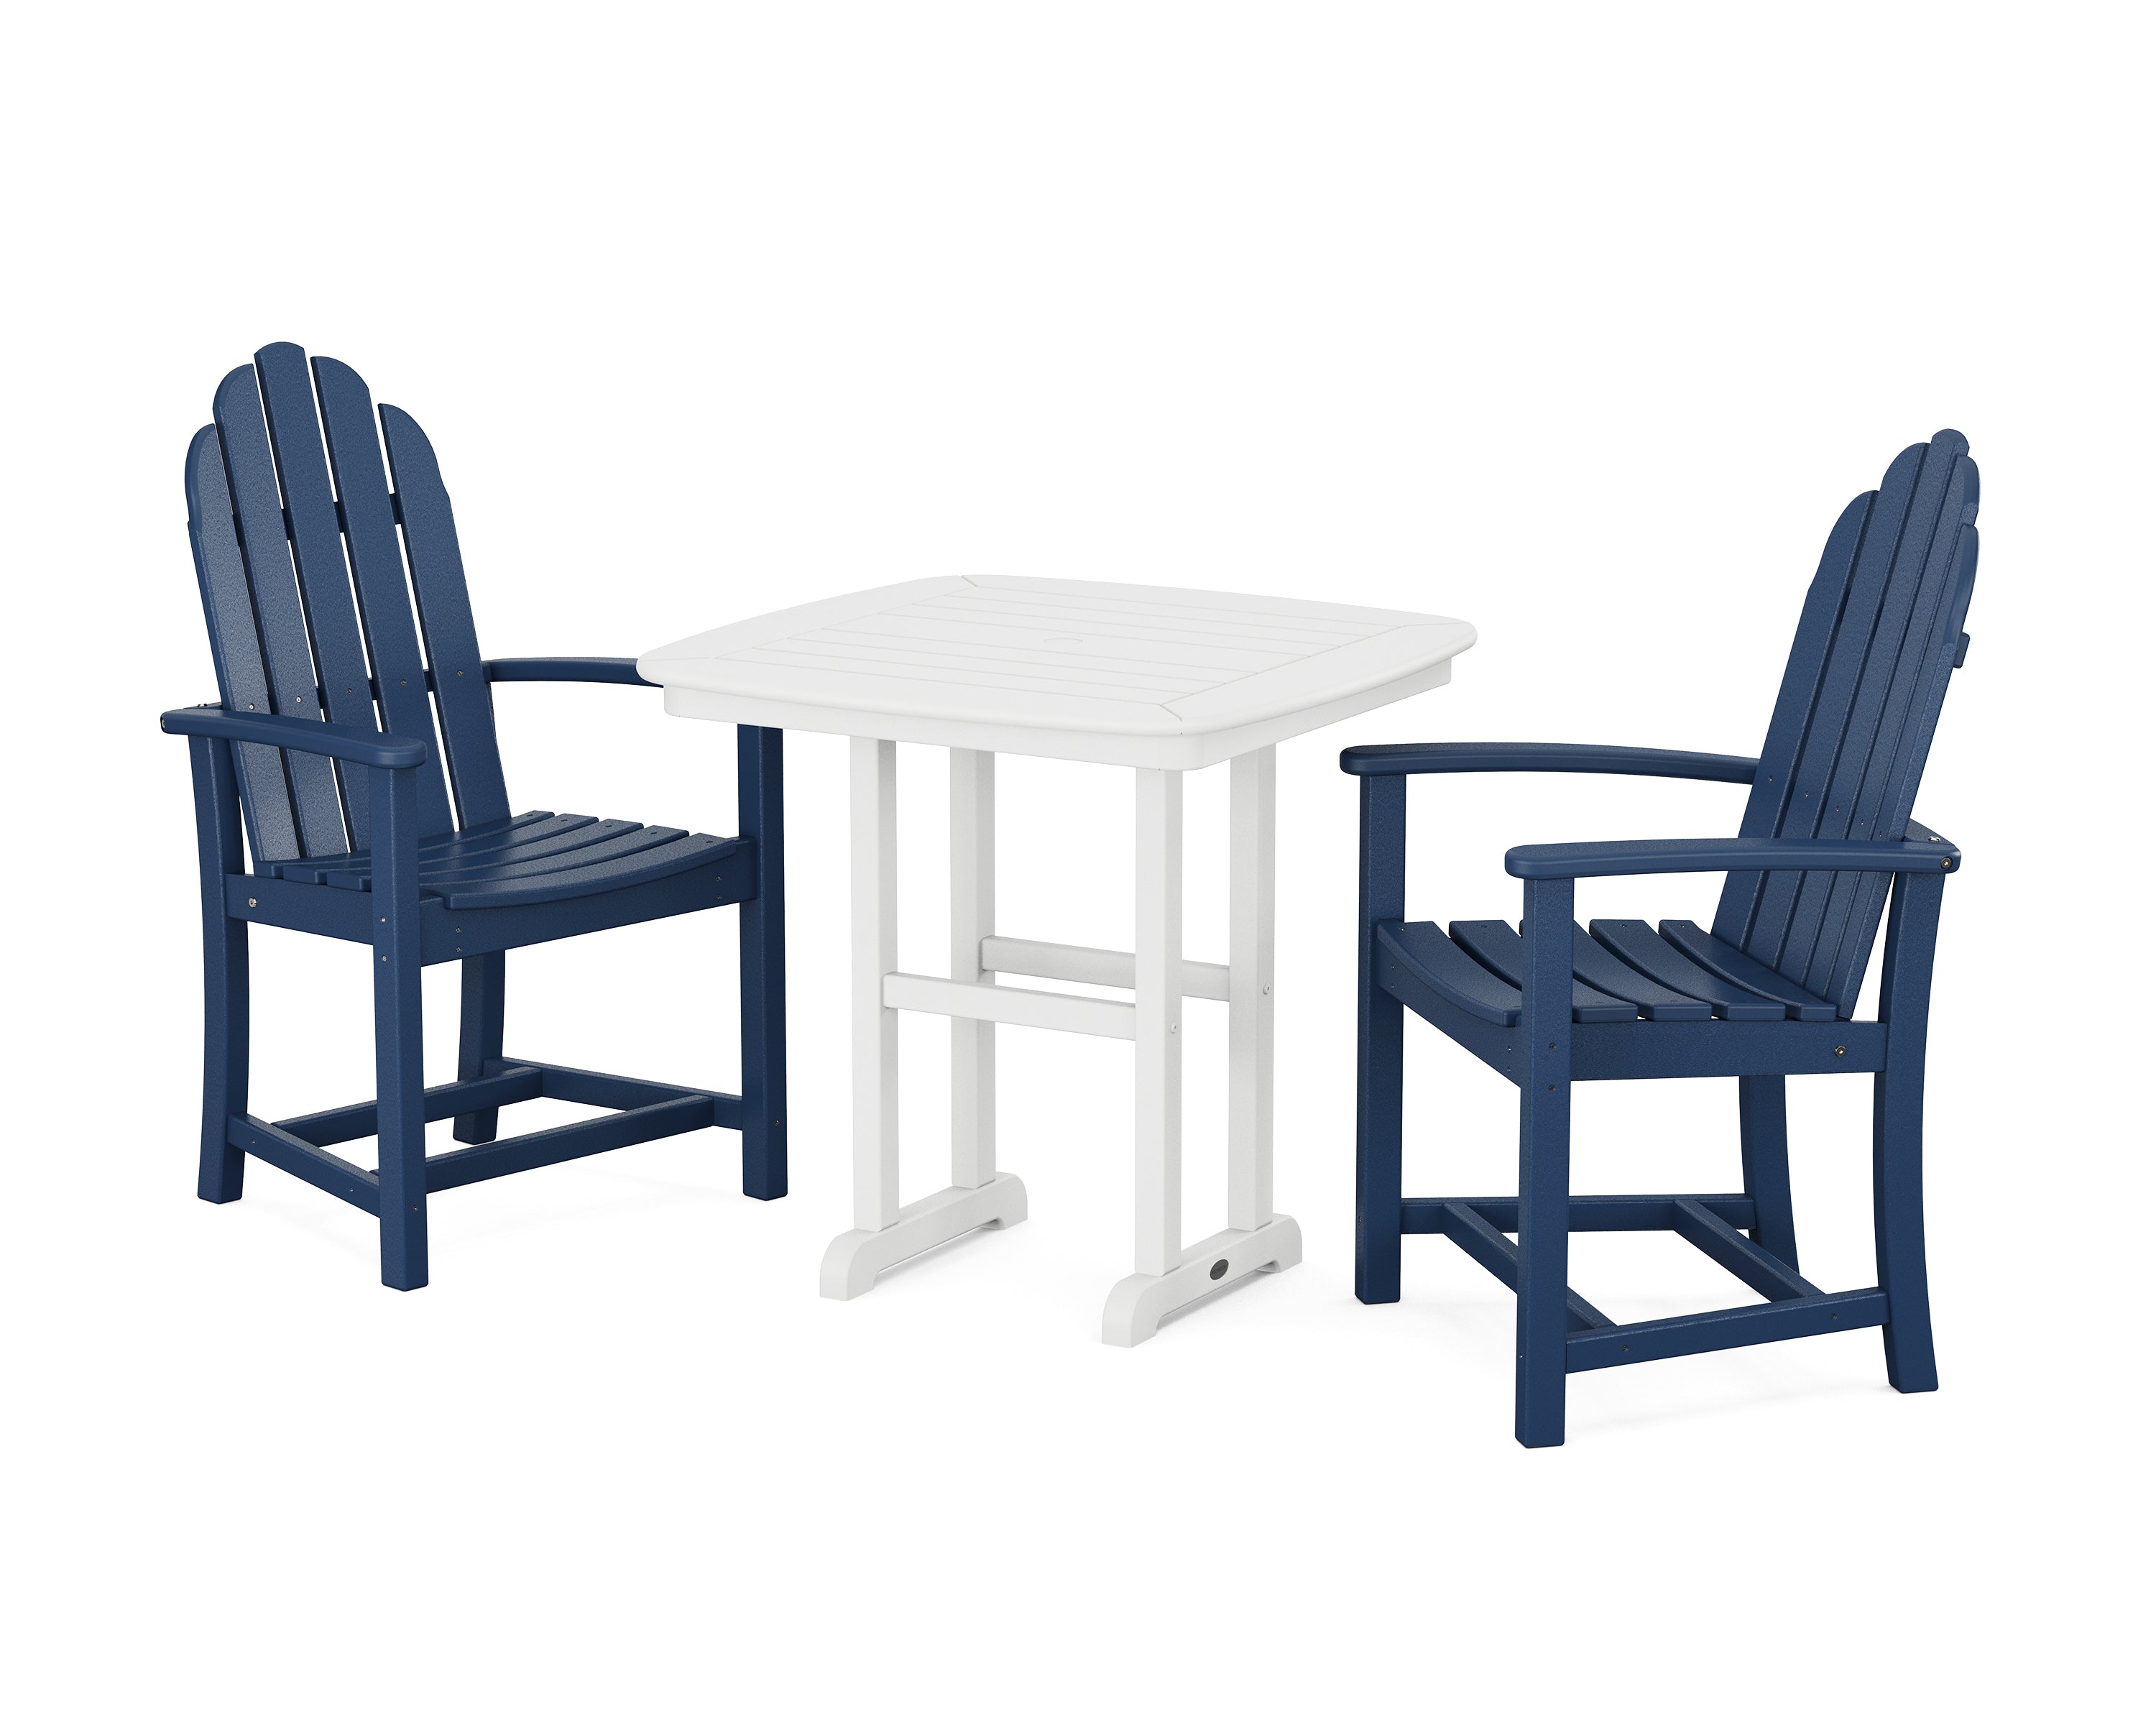 POLYWOOD® Classic Adirondack 3-Piece Dining Set in Navy / White